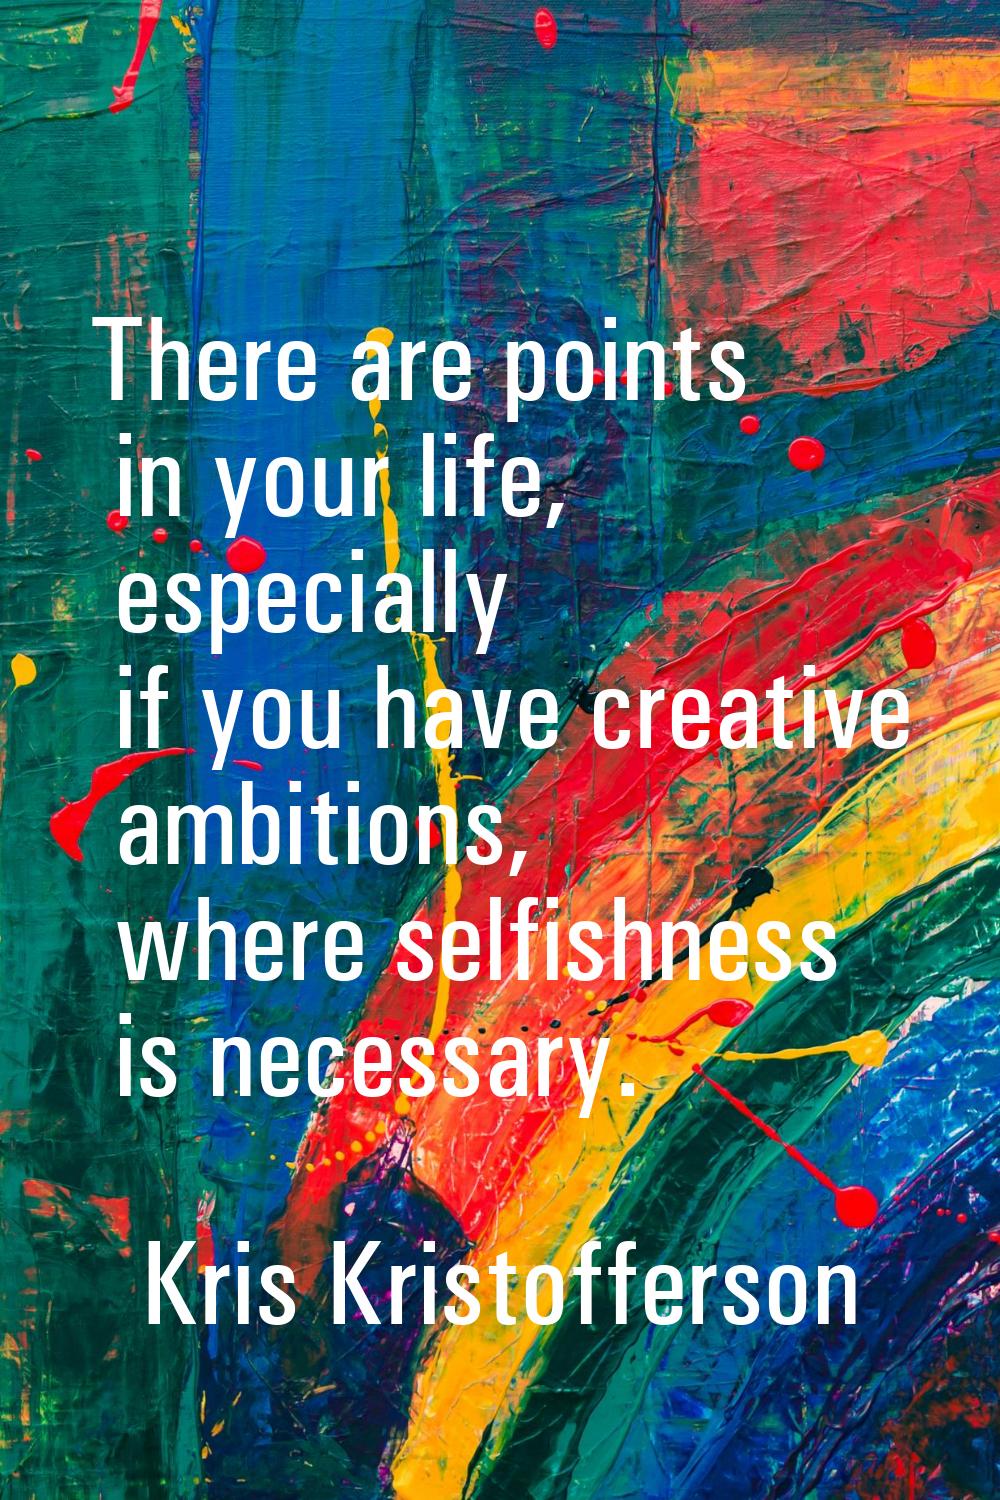 There are points in your life, especially if you have creative ambitions, where selfishness is nece